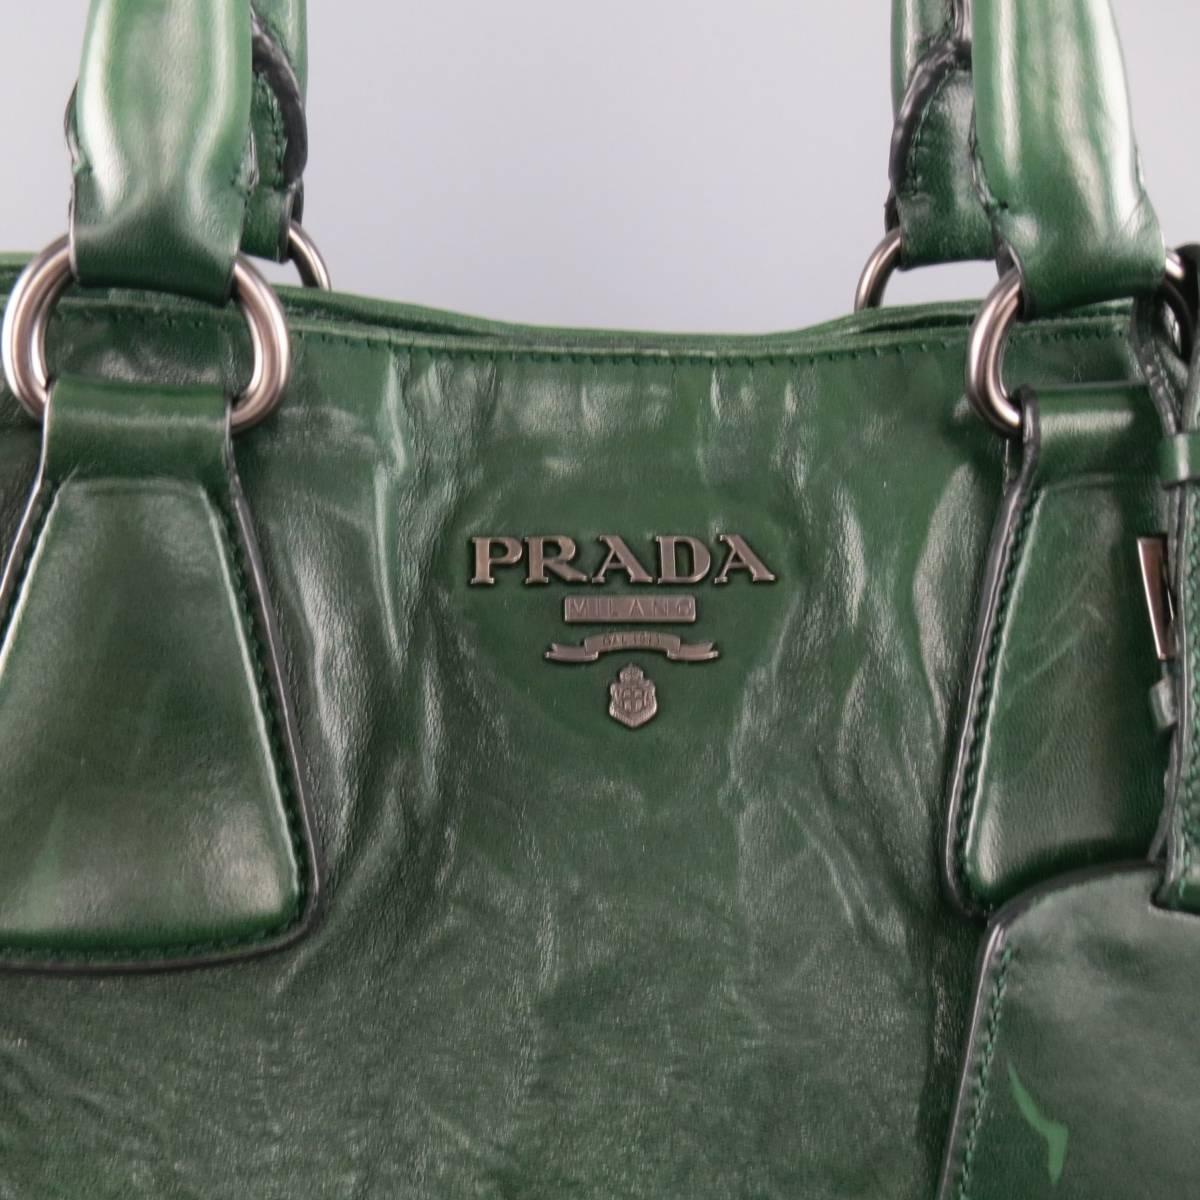 Unique PRADA tote bag comes in a green wrinkle textured leather and featured a dark silver tone metal logo at front, double covered top handles, luggage tag, top snap closure, and detachable shoulder strap. Wear throughout. As-Is. Made in italy. AD